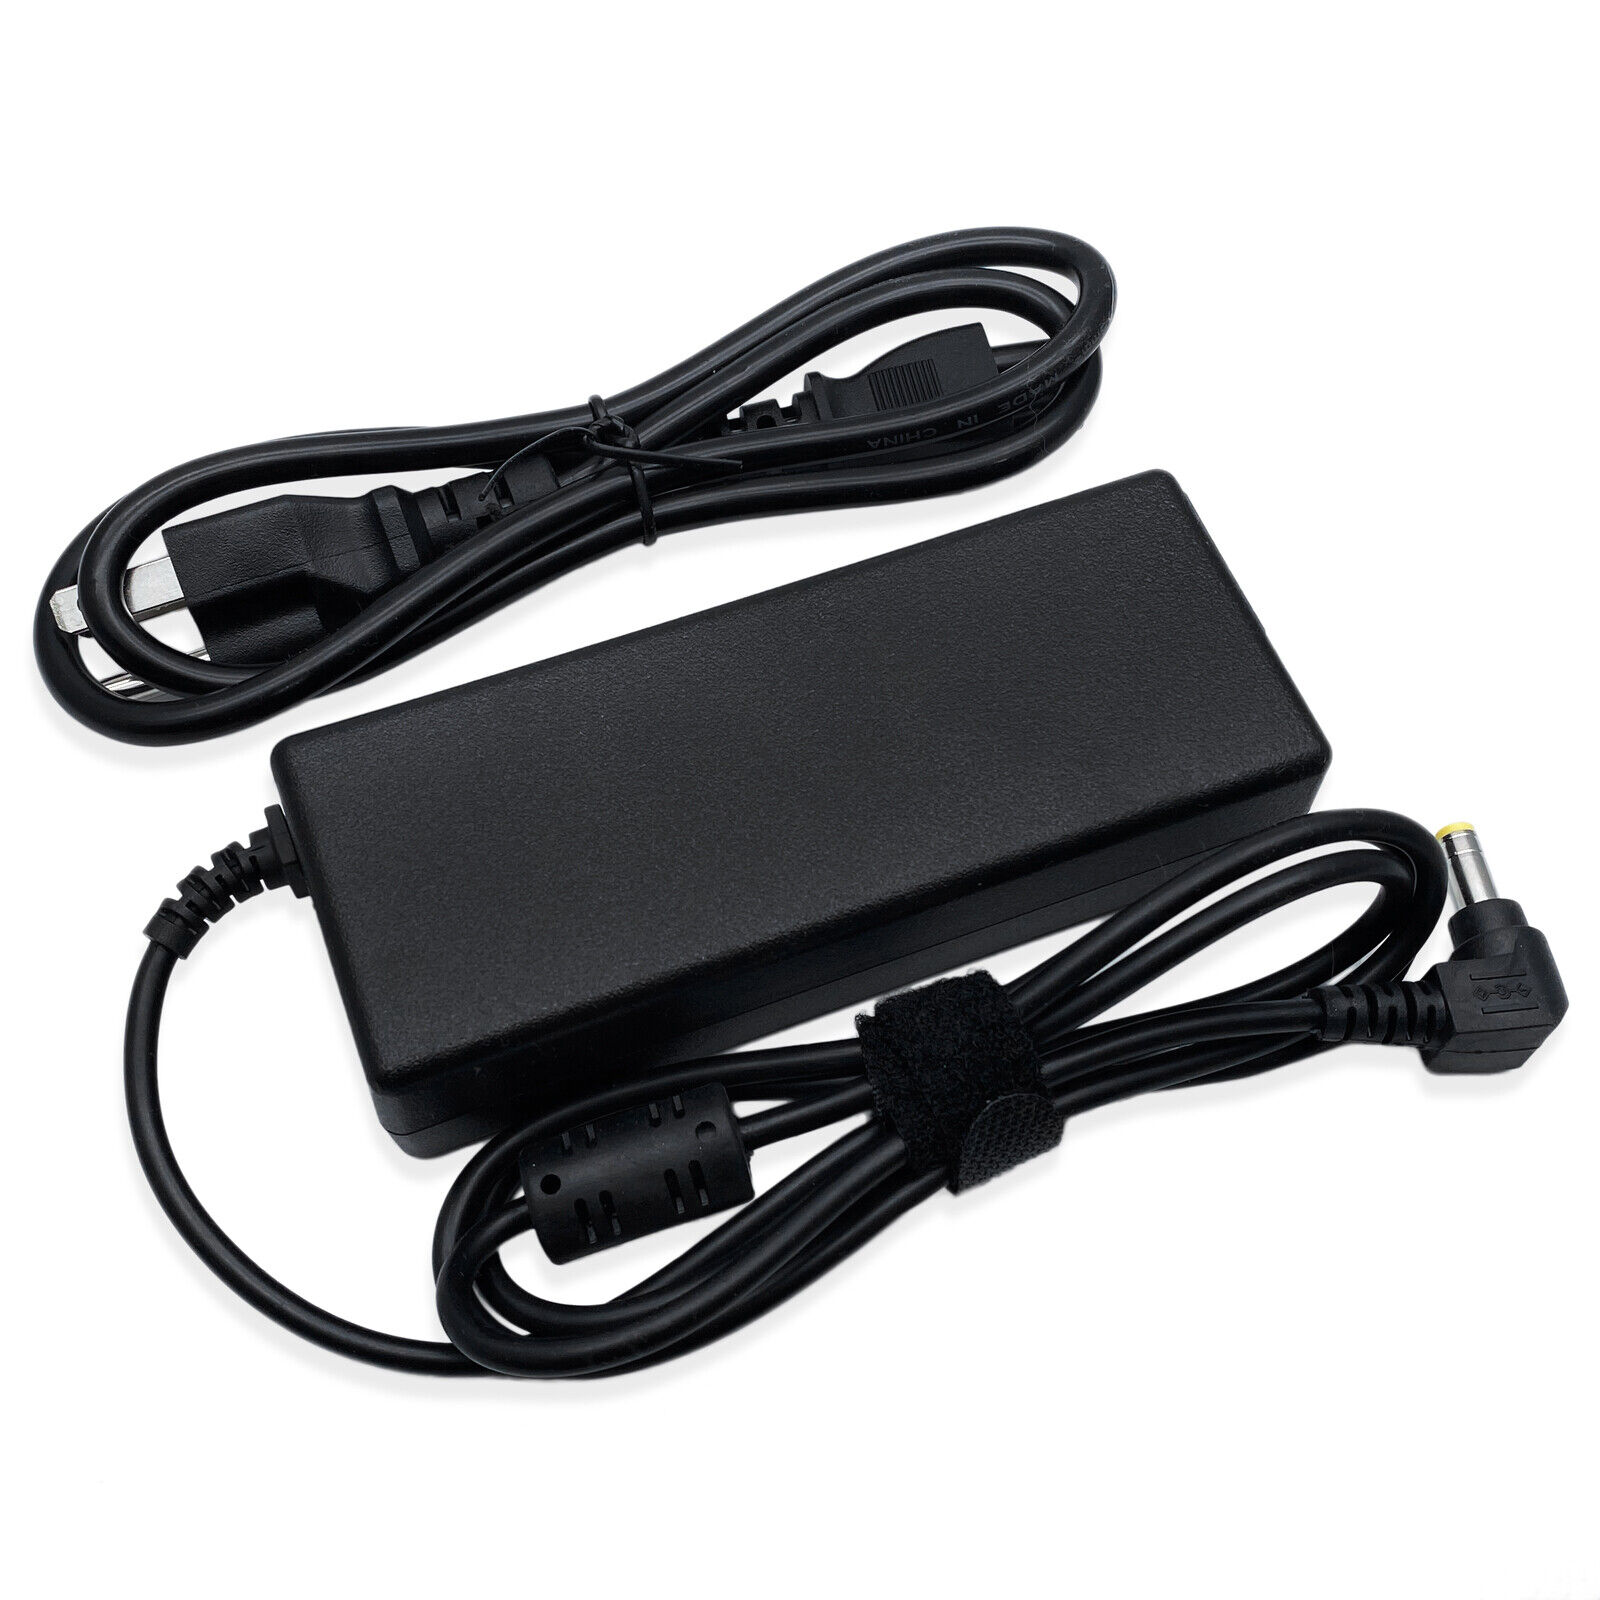 AC Adapter Charger for Toshiba Satellite e205-s1904 l305-s5907 p775-s7100